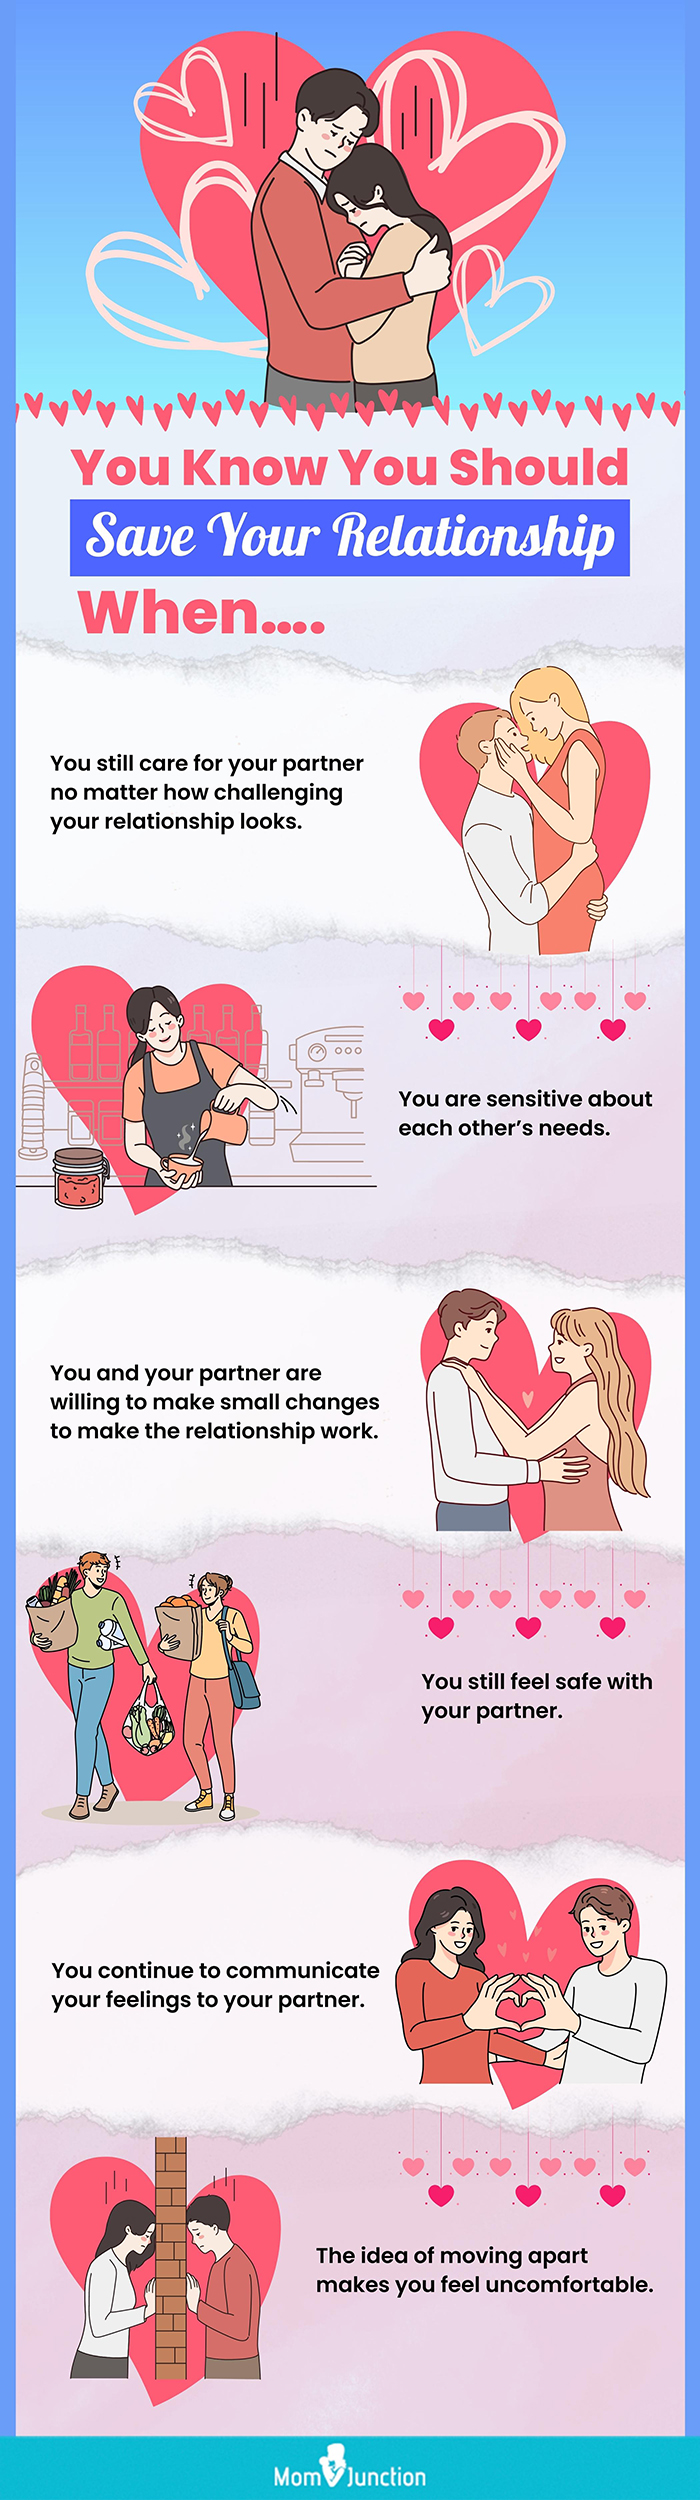 signs your relationship is worth saving (infographic)